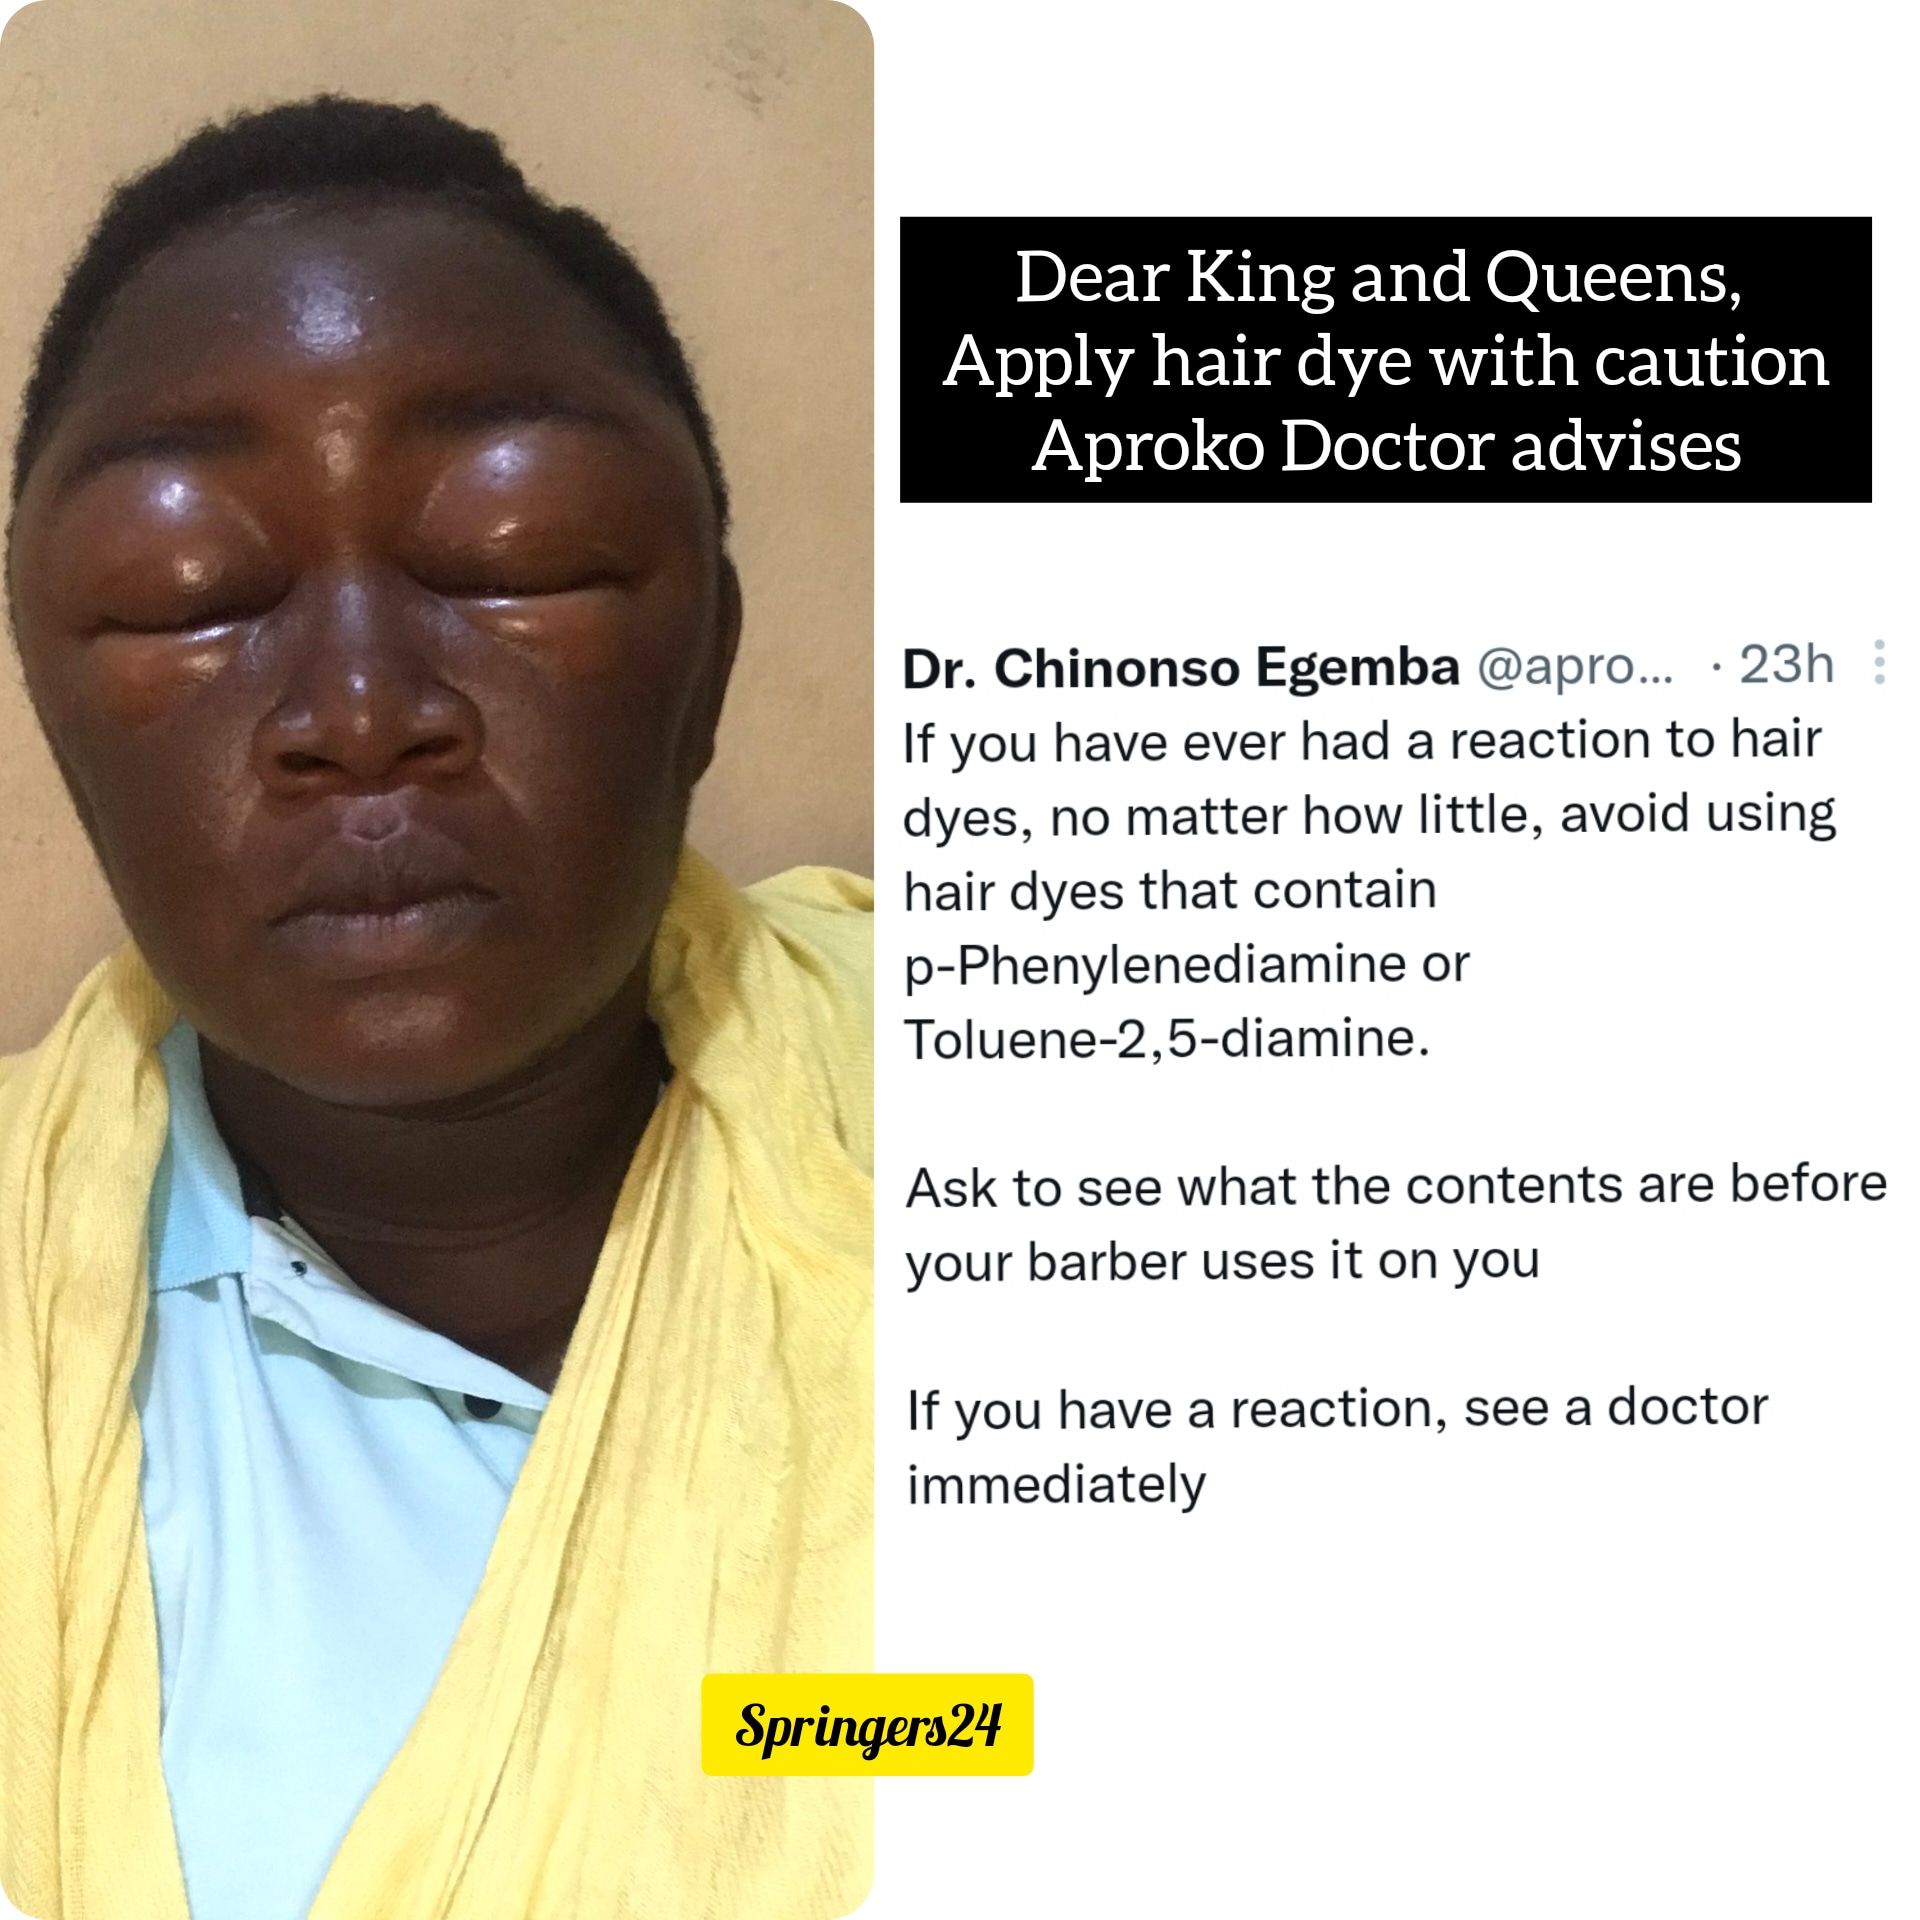 You might have this reaction if you dye your hair with this Chemical- Aproko Doctor